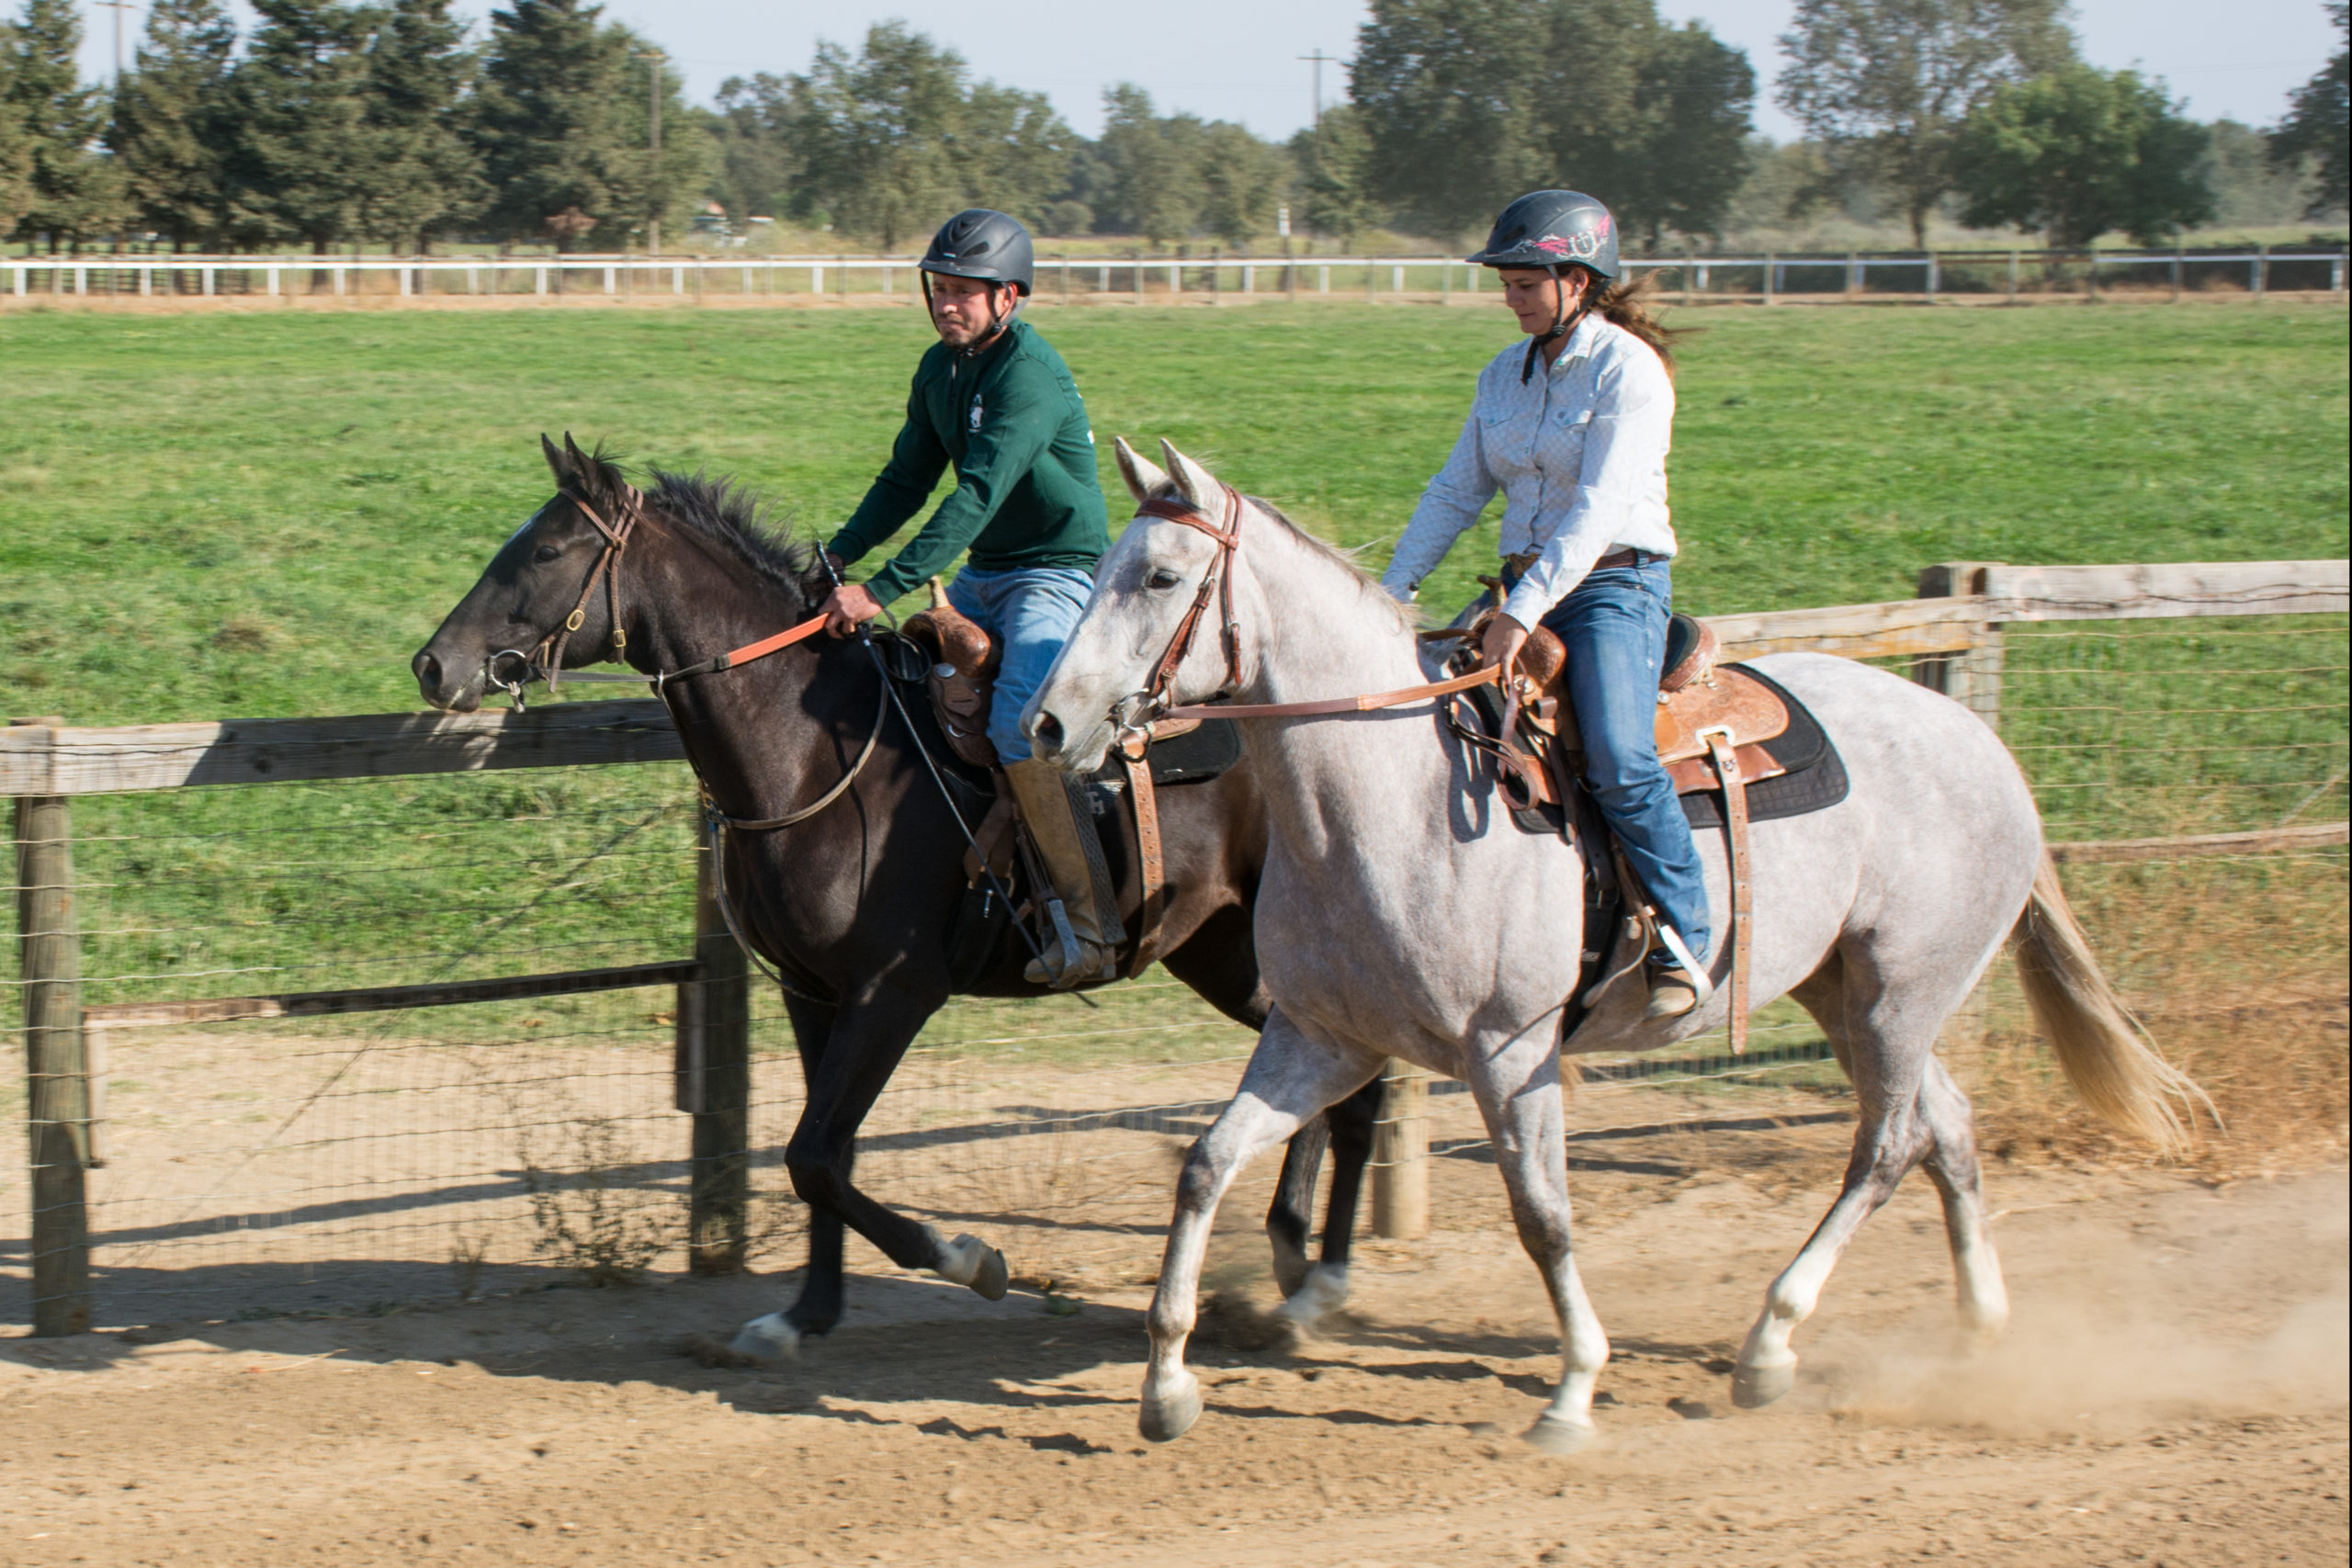 Trainer Mariah Coles and Assistant Trainer Luis Pena at Daehling Ranch Thoroughbreds Elk Grove, California